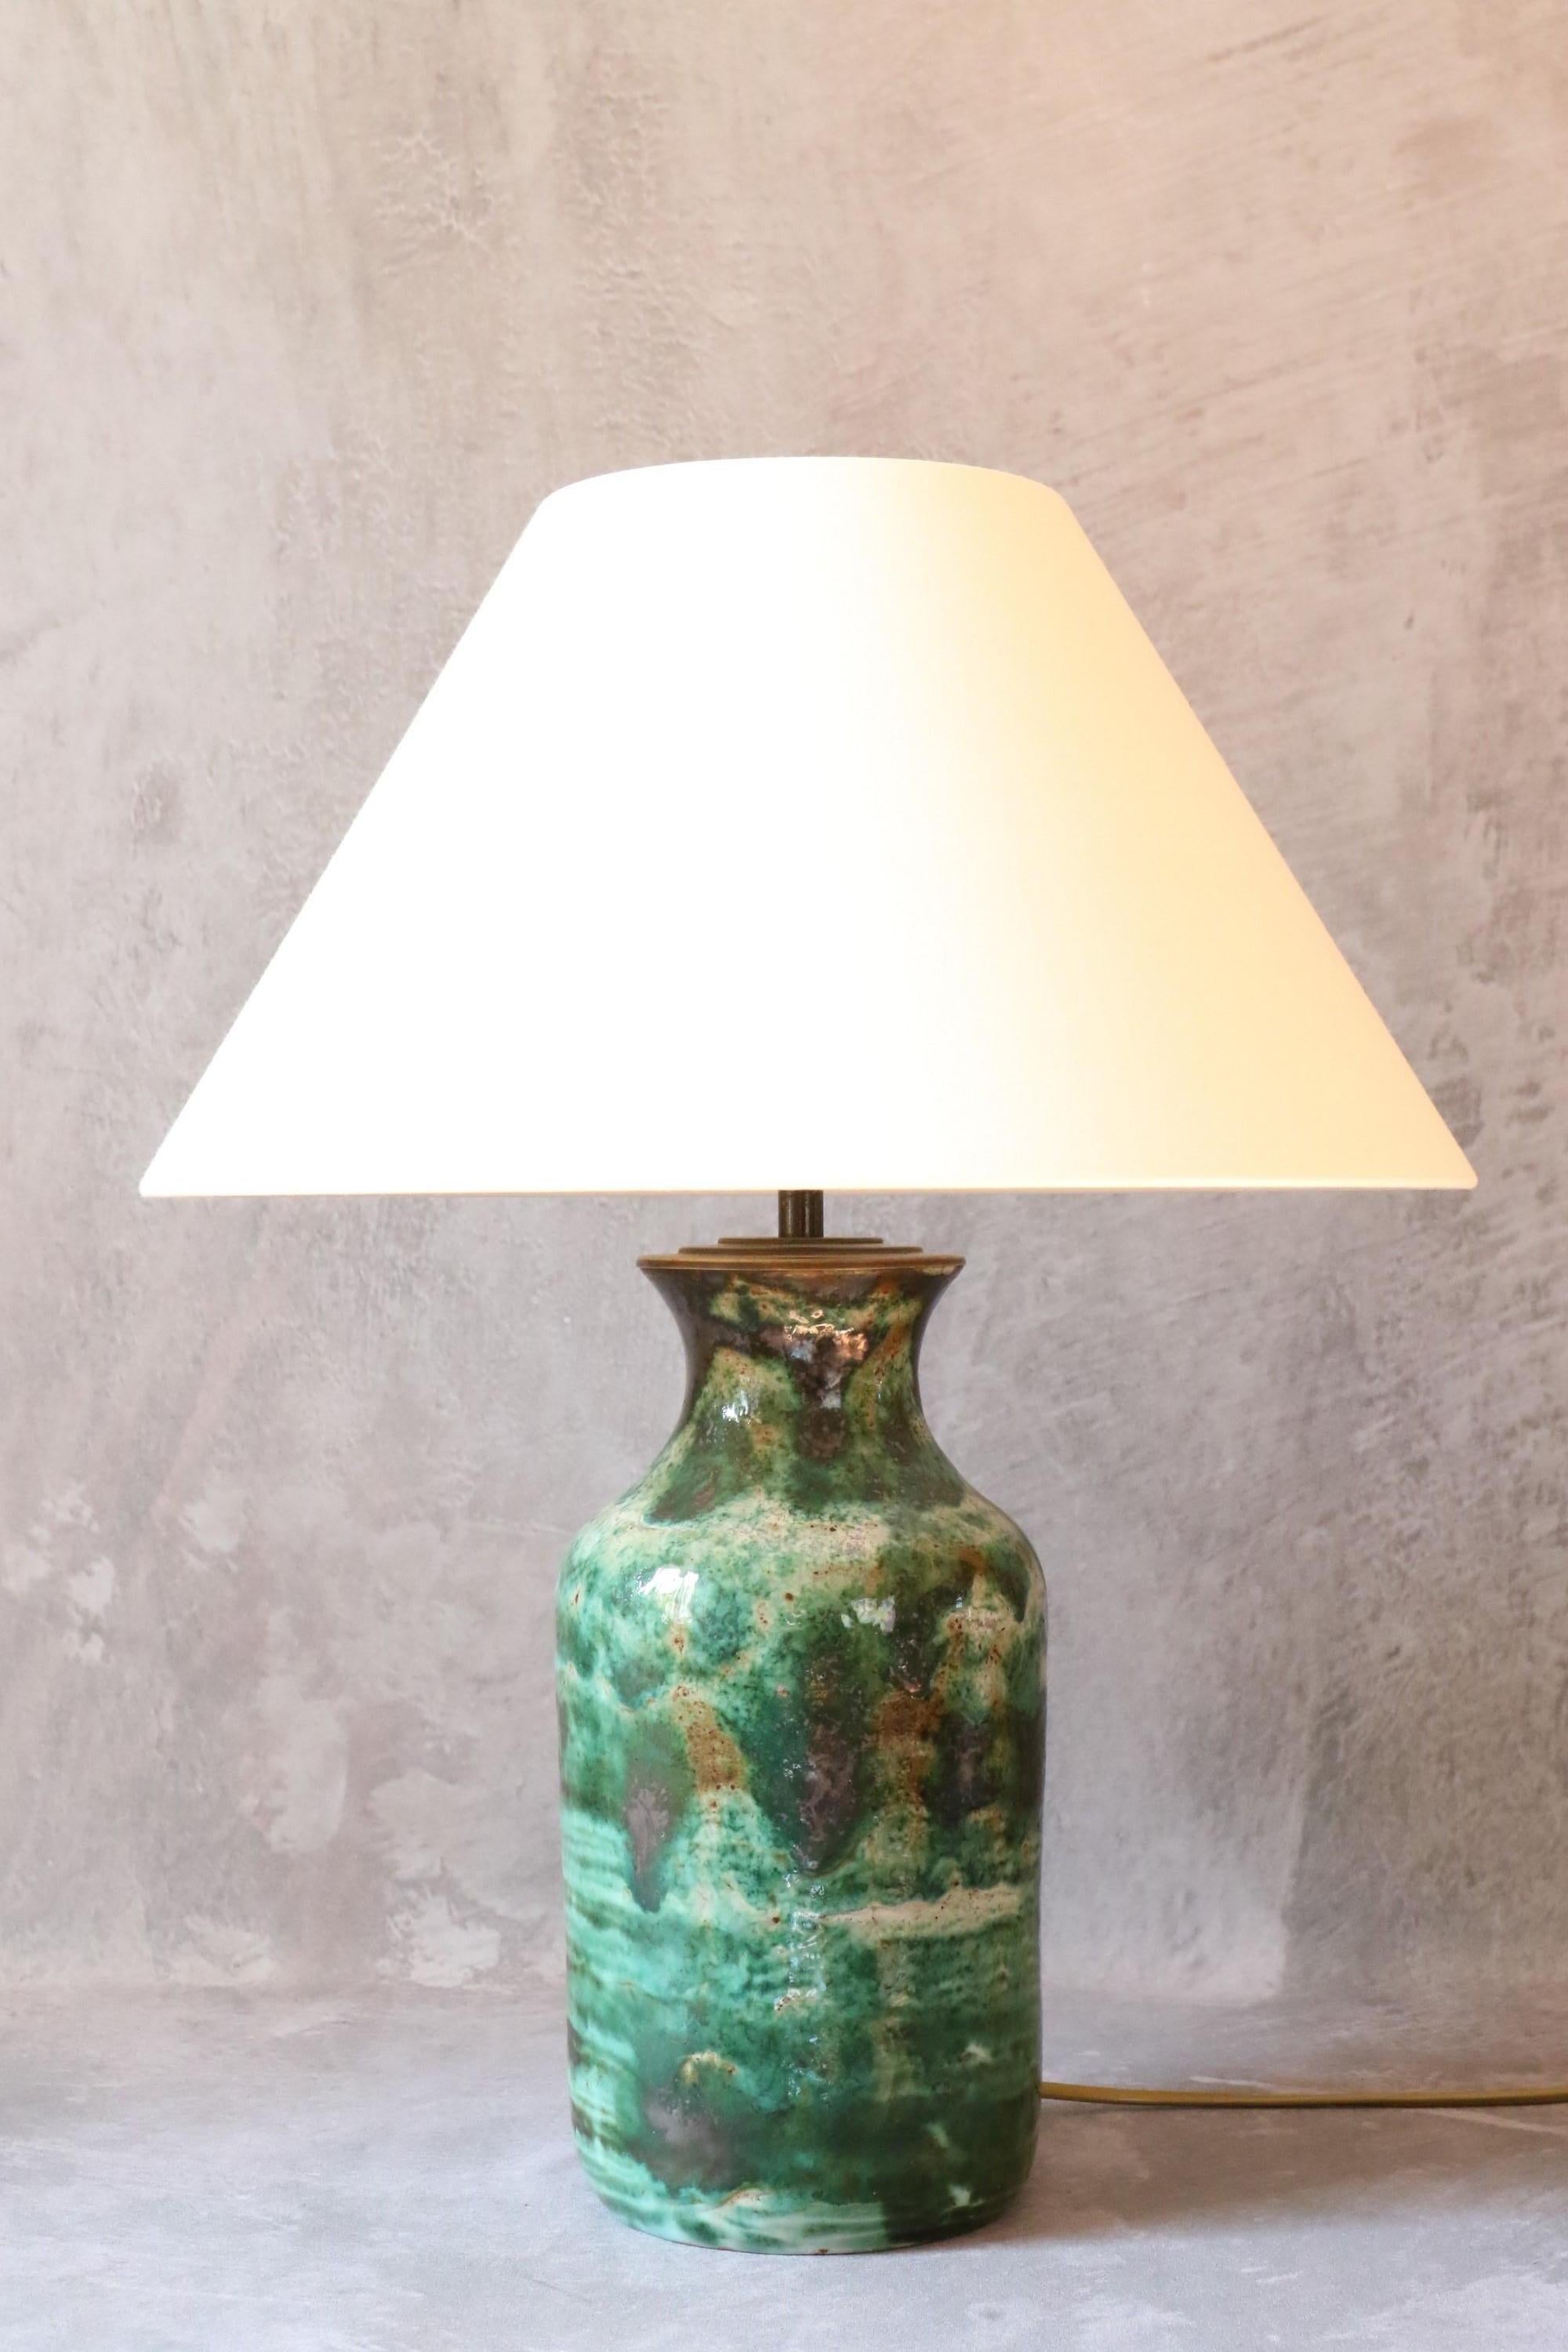 Robert Picault, High Ceramic Lamp, Signed, Vallauris, France, 1950s

Stunning ceramic table lamp by Robert Picault. The glaze tones are typical of Picault's work.
In very good condition. 
Signed and inscribed 